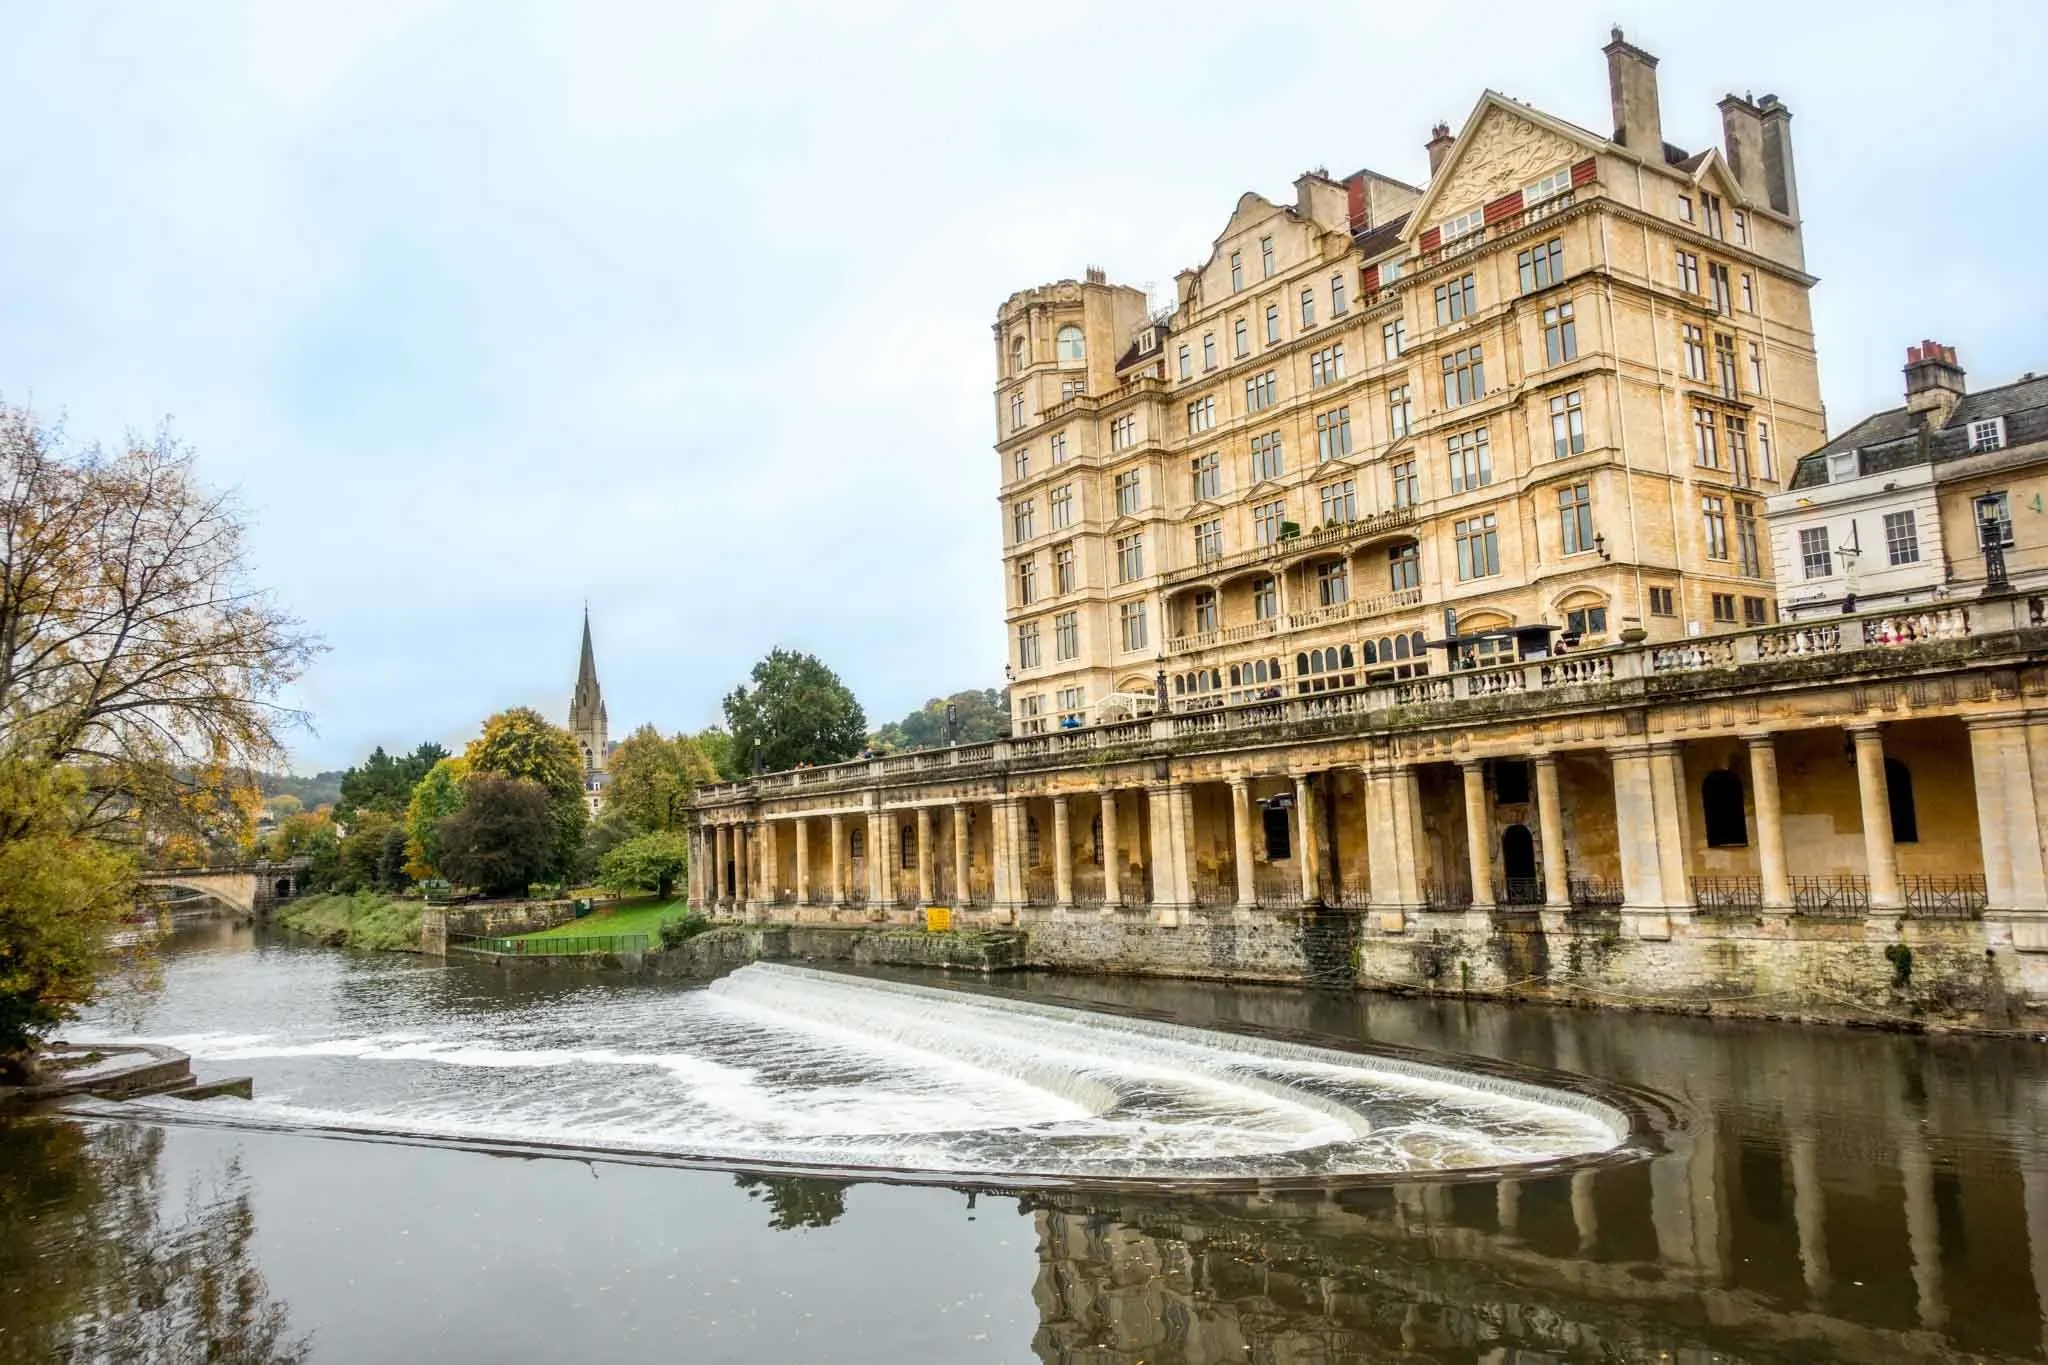 Walking along the River Avon is one of the great things to do on a weekend in Bath England